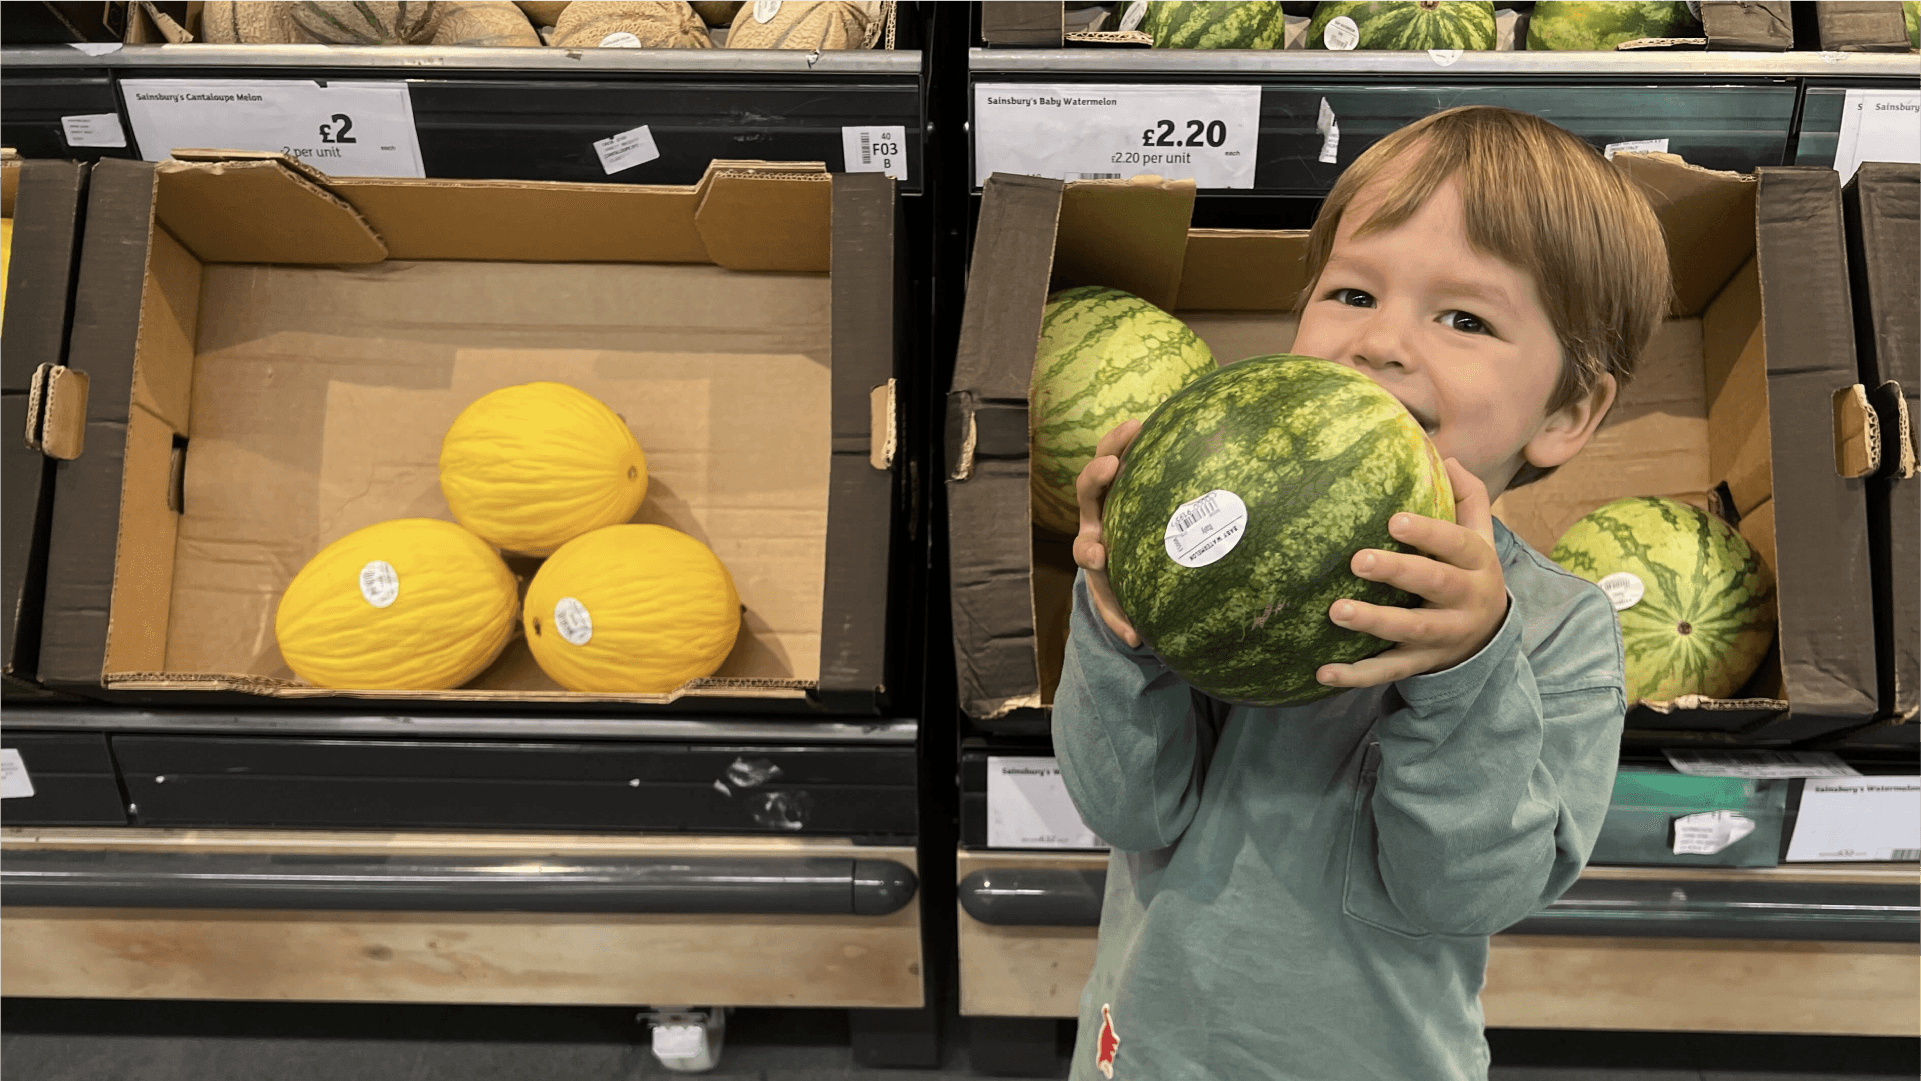 A child holding a watermelon playing supermarket dash!